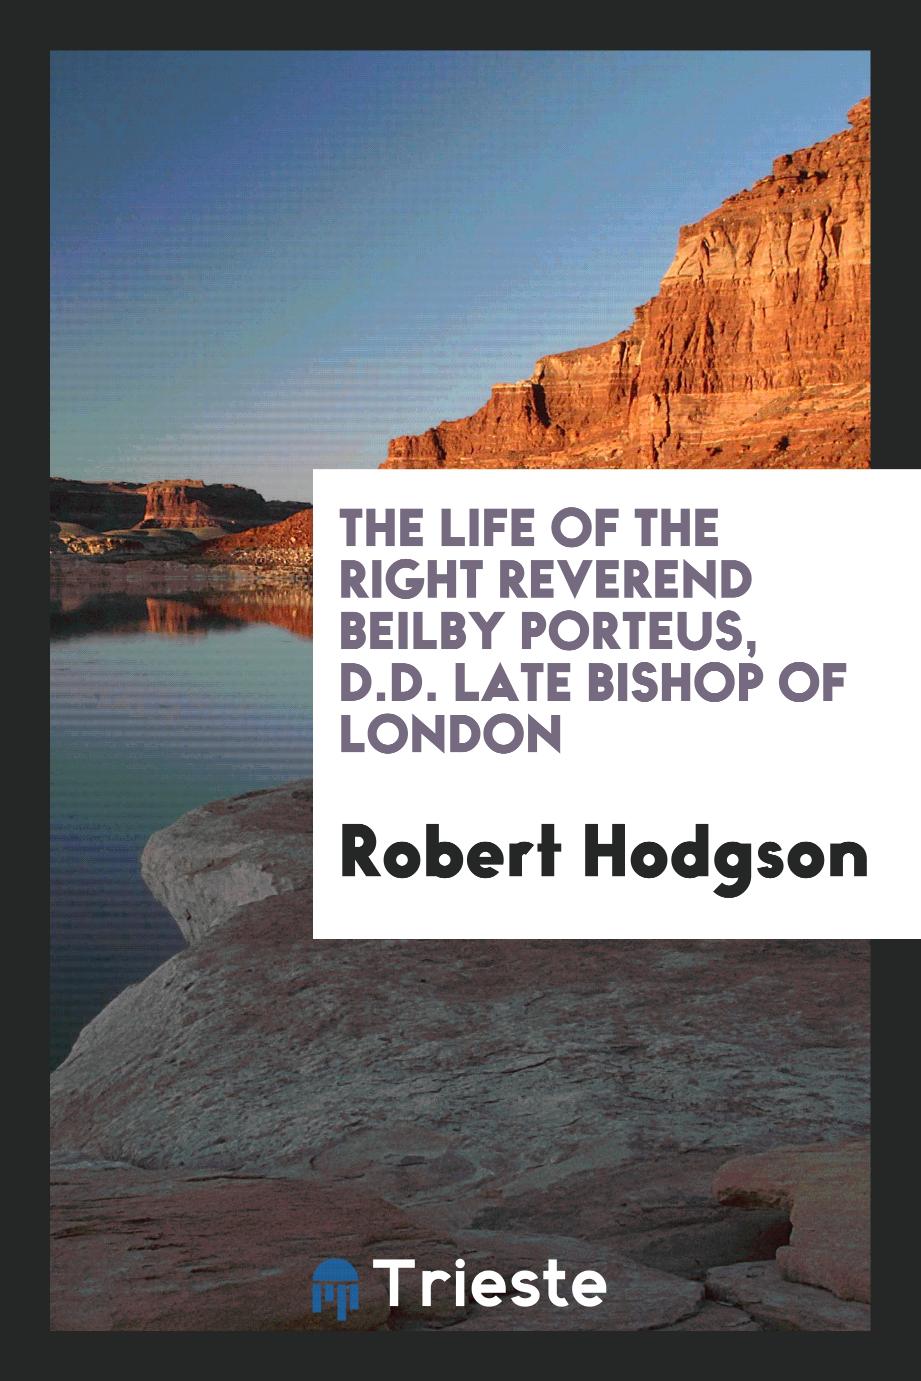 The life of the Right Reverend Beilby Porteus, D.D. late Bishop of London